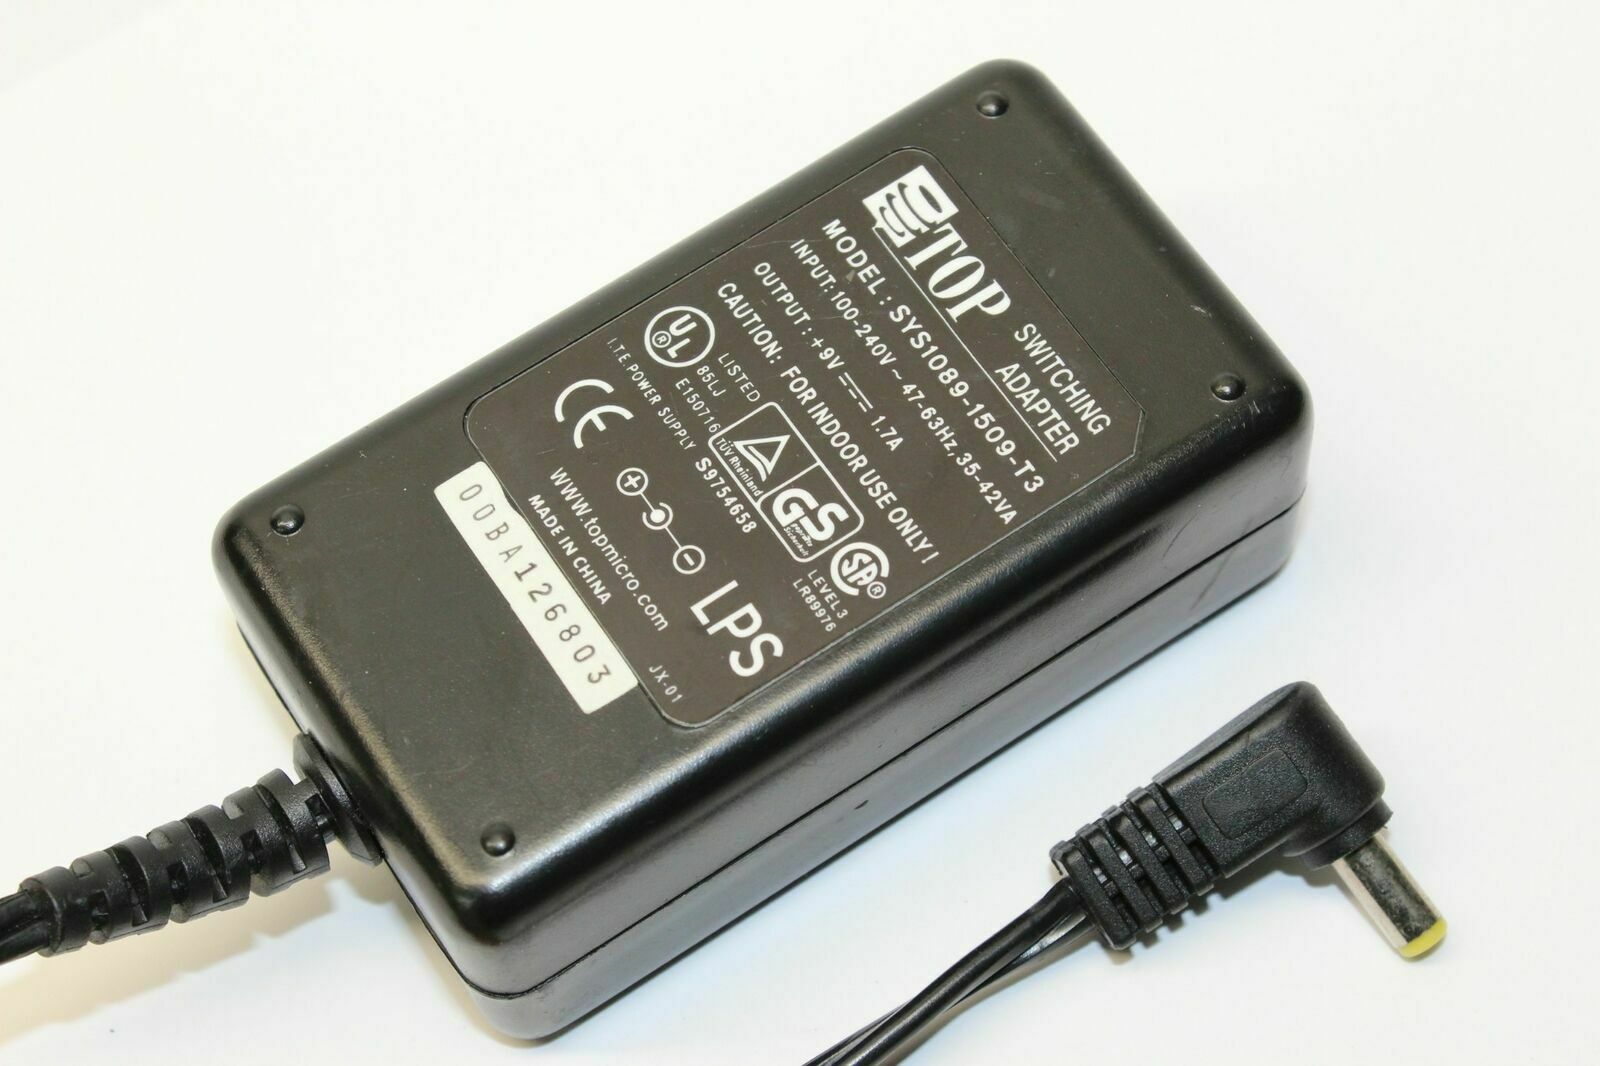 New 9V 1.7A Top SYS1089-1509-T3 Class 2 Transformer Ac Adapter